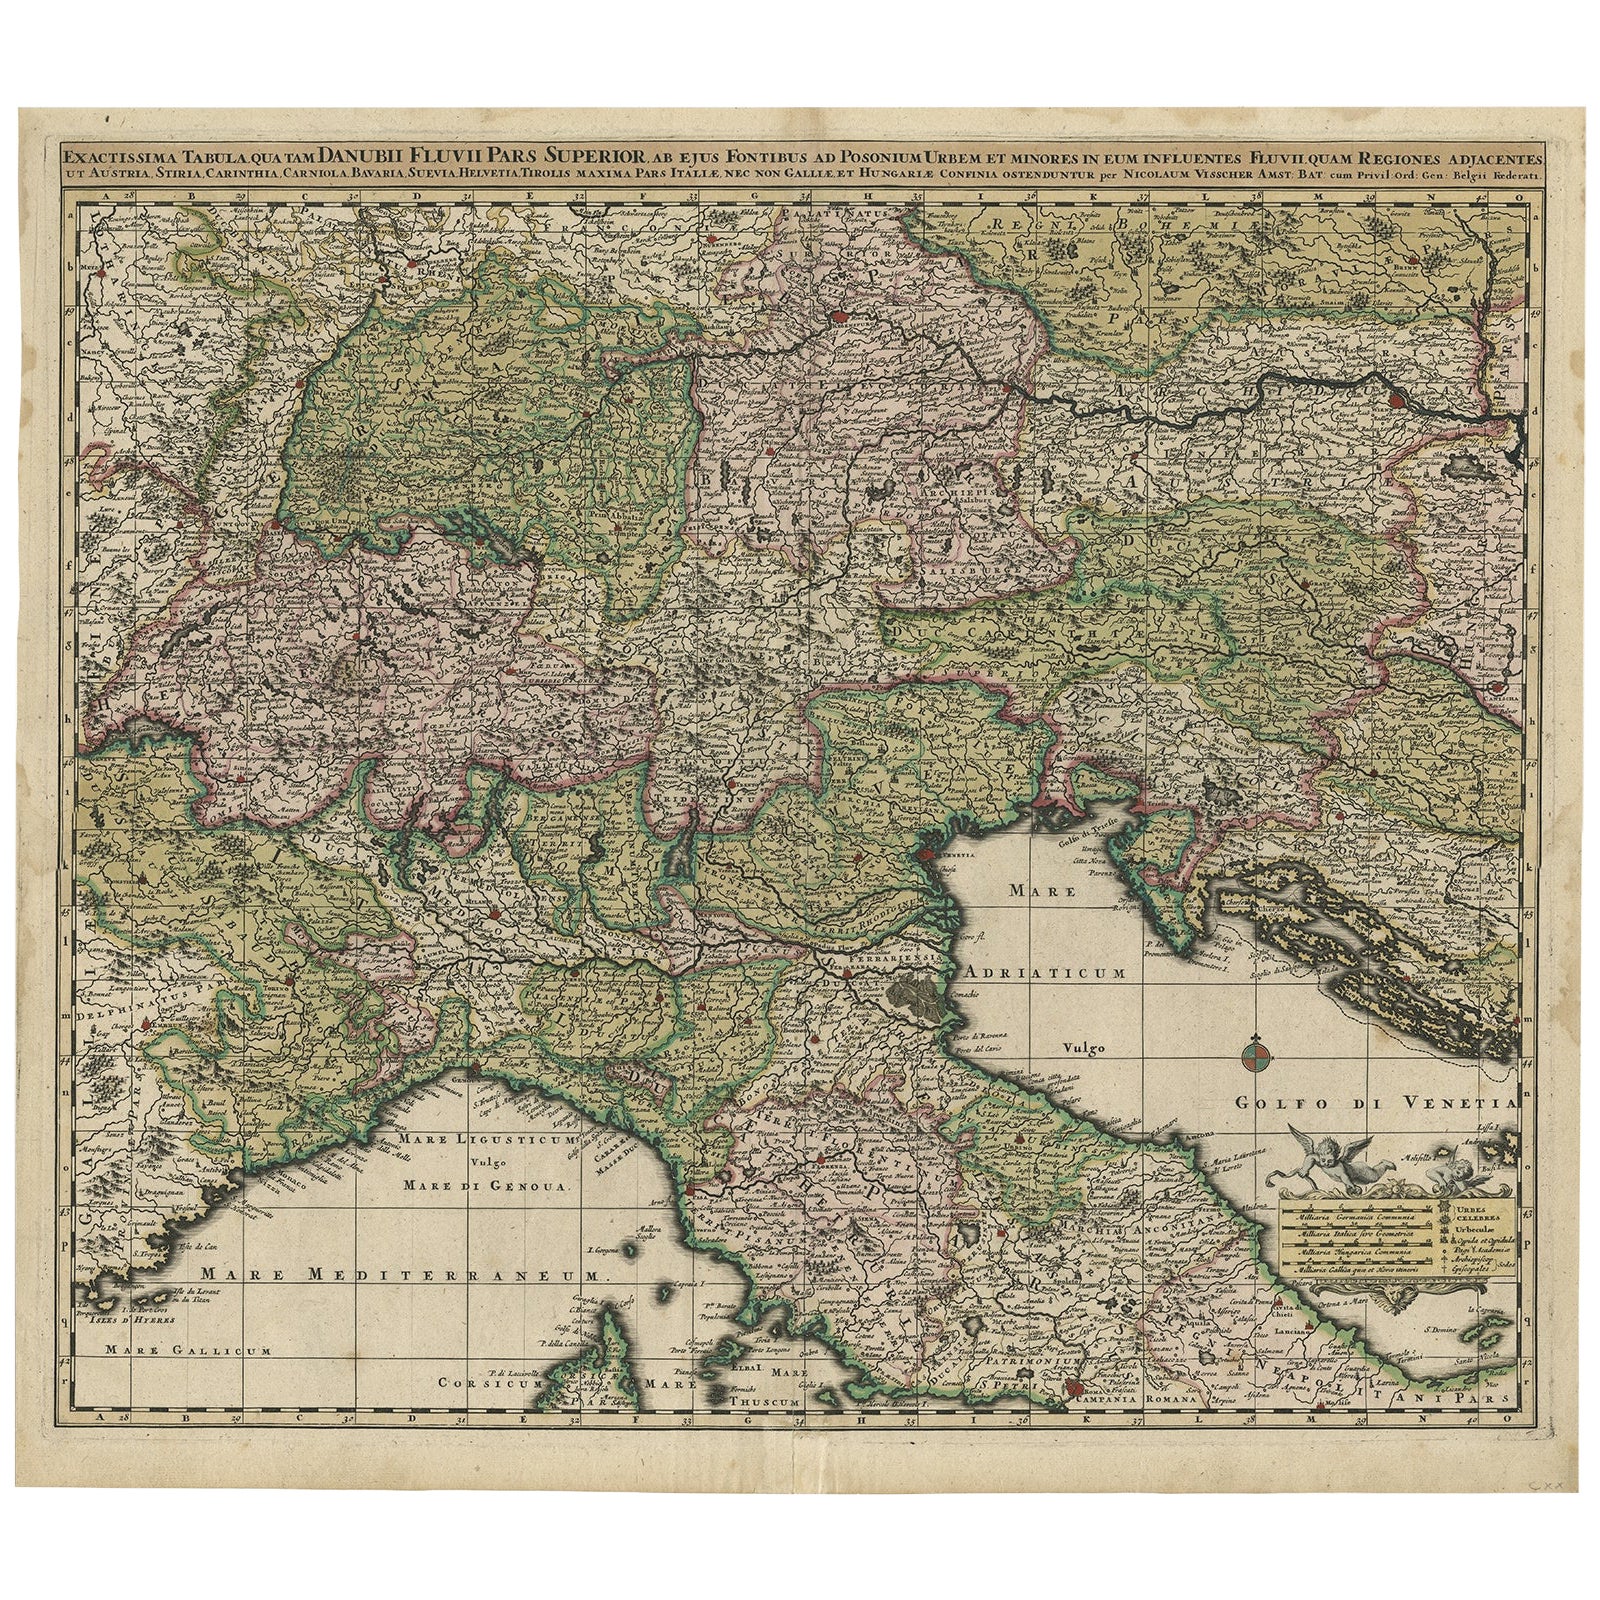 Finely Detailed Map Covering Northern Italy, Austria, Slovenia & Croatia, c.1690